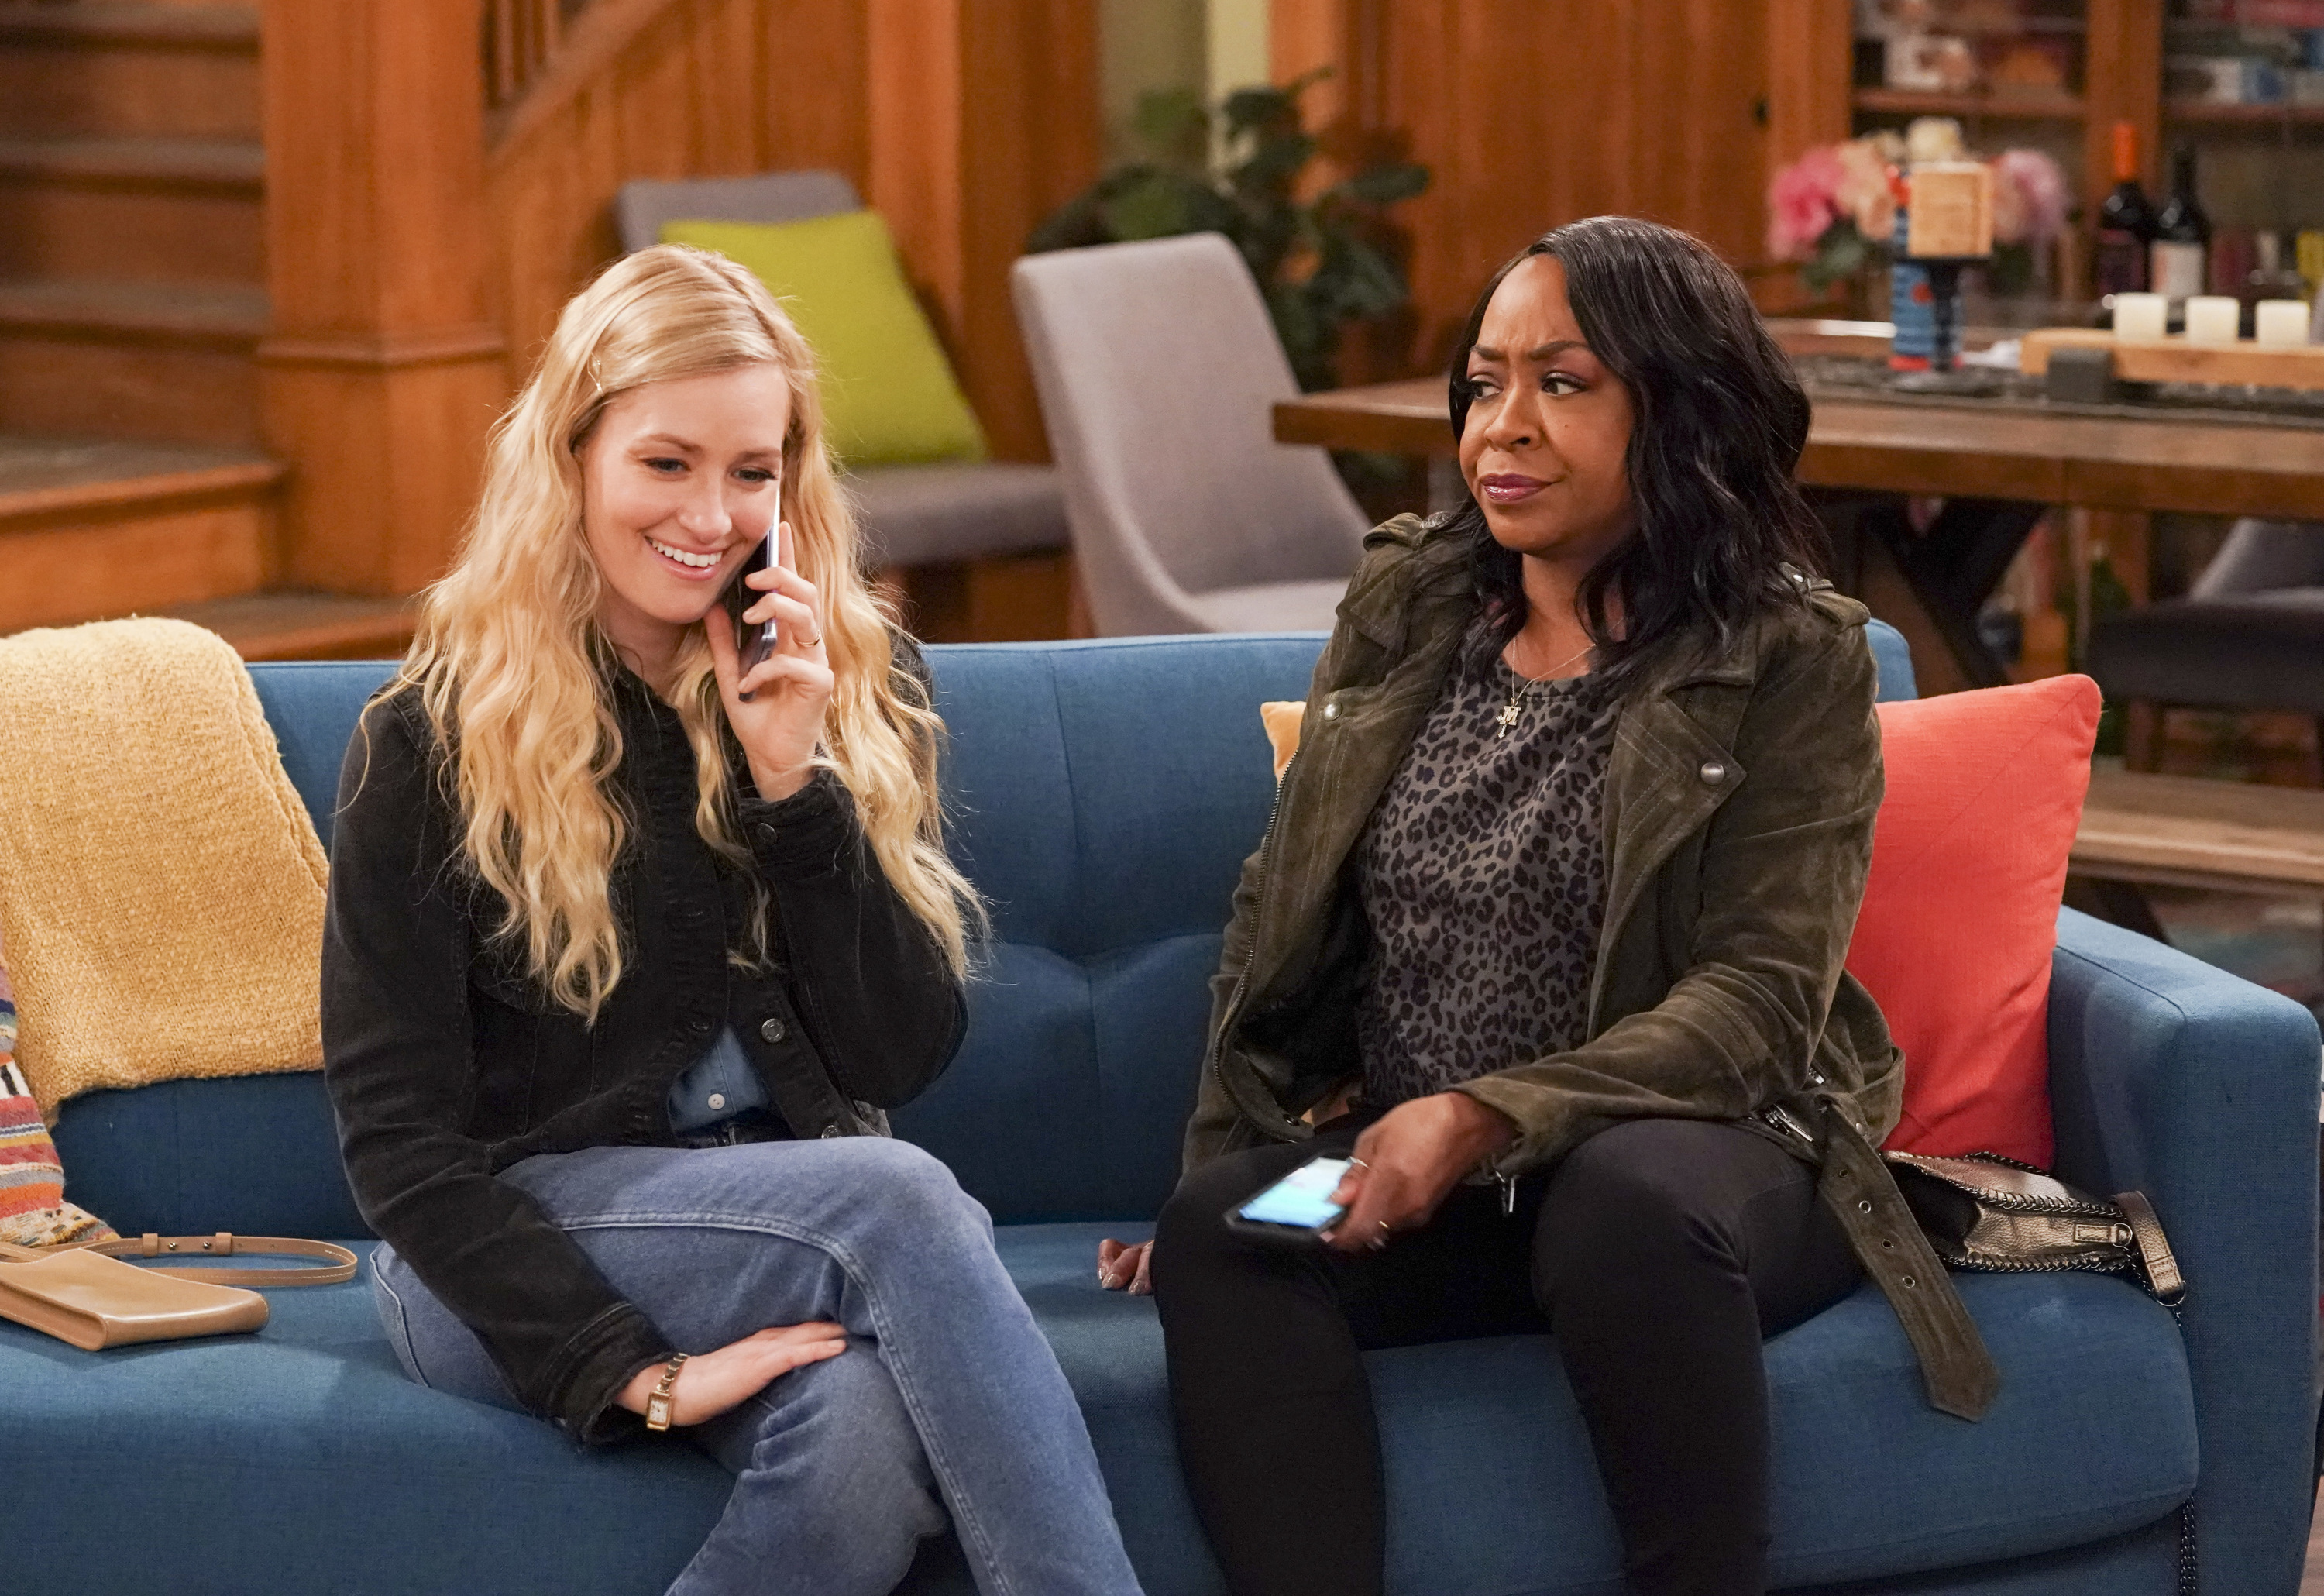 Beth Behrs And Tichina Arnold On What ‘The Neighborhood’ Hopes To Achieve: ‘Strike Conversations In Places That You Normally Never Would’